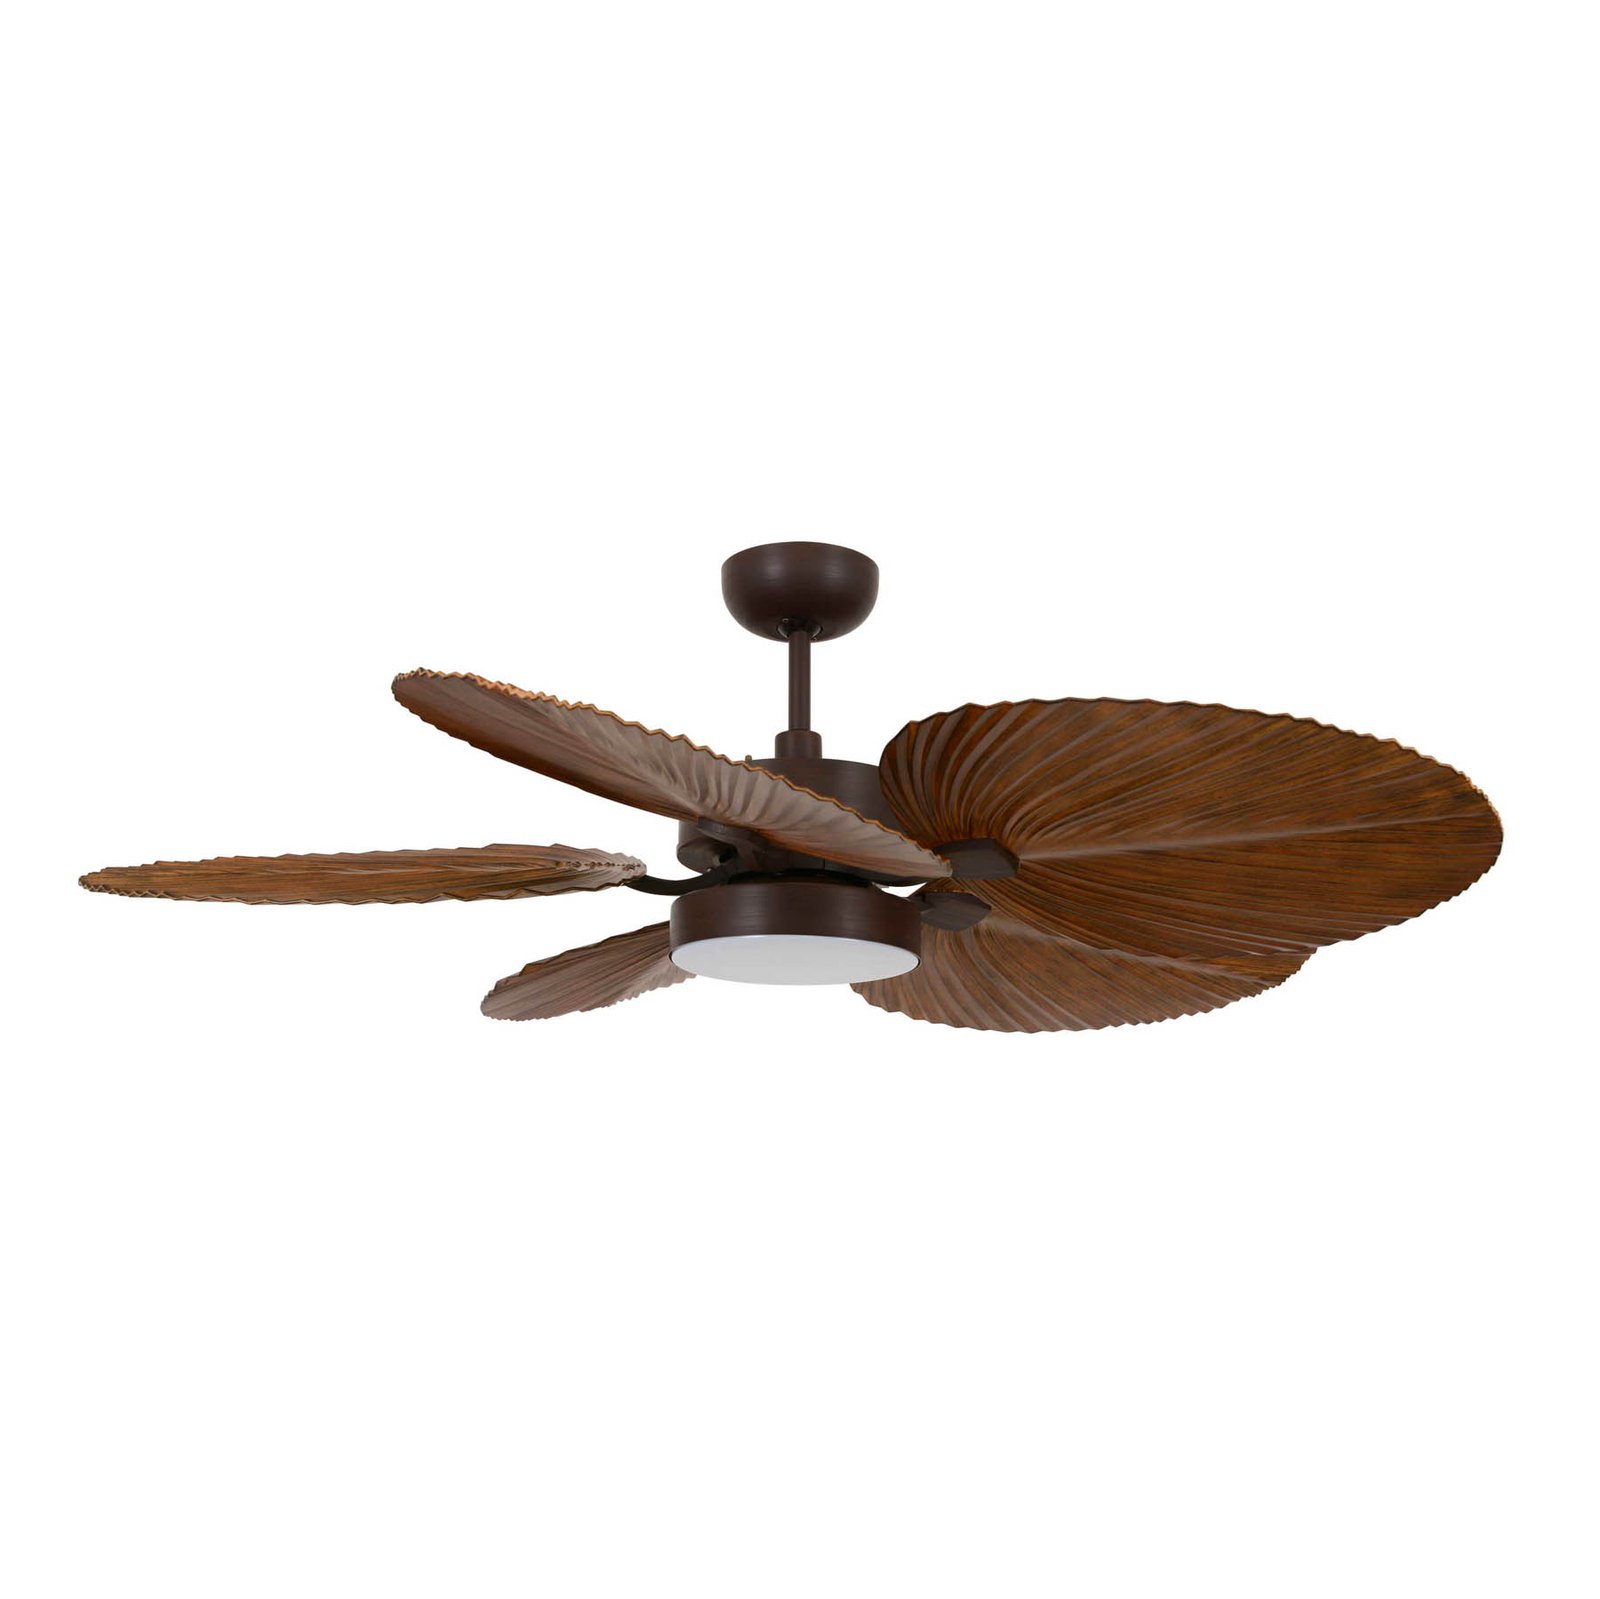 Bali ceiling fan with LED light, bronze